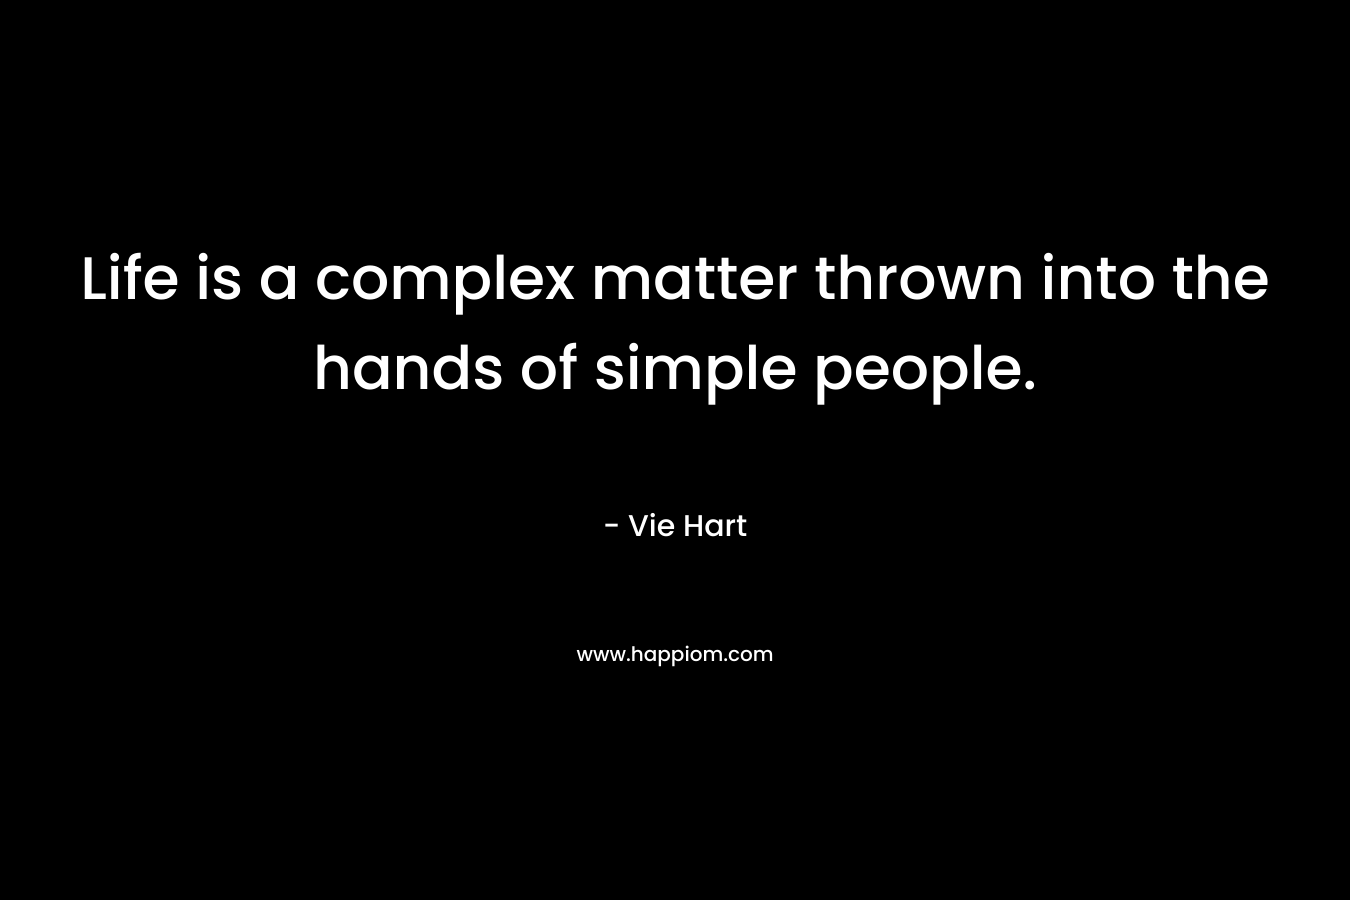 Life is a complex matter thrown into the hands of simple people. – Vie Hart